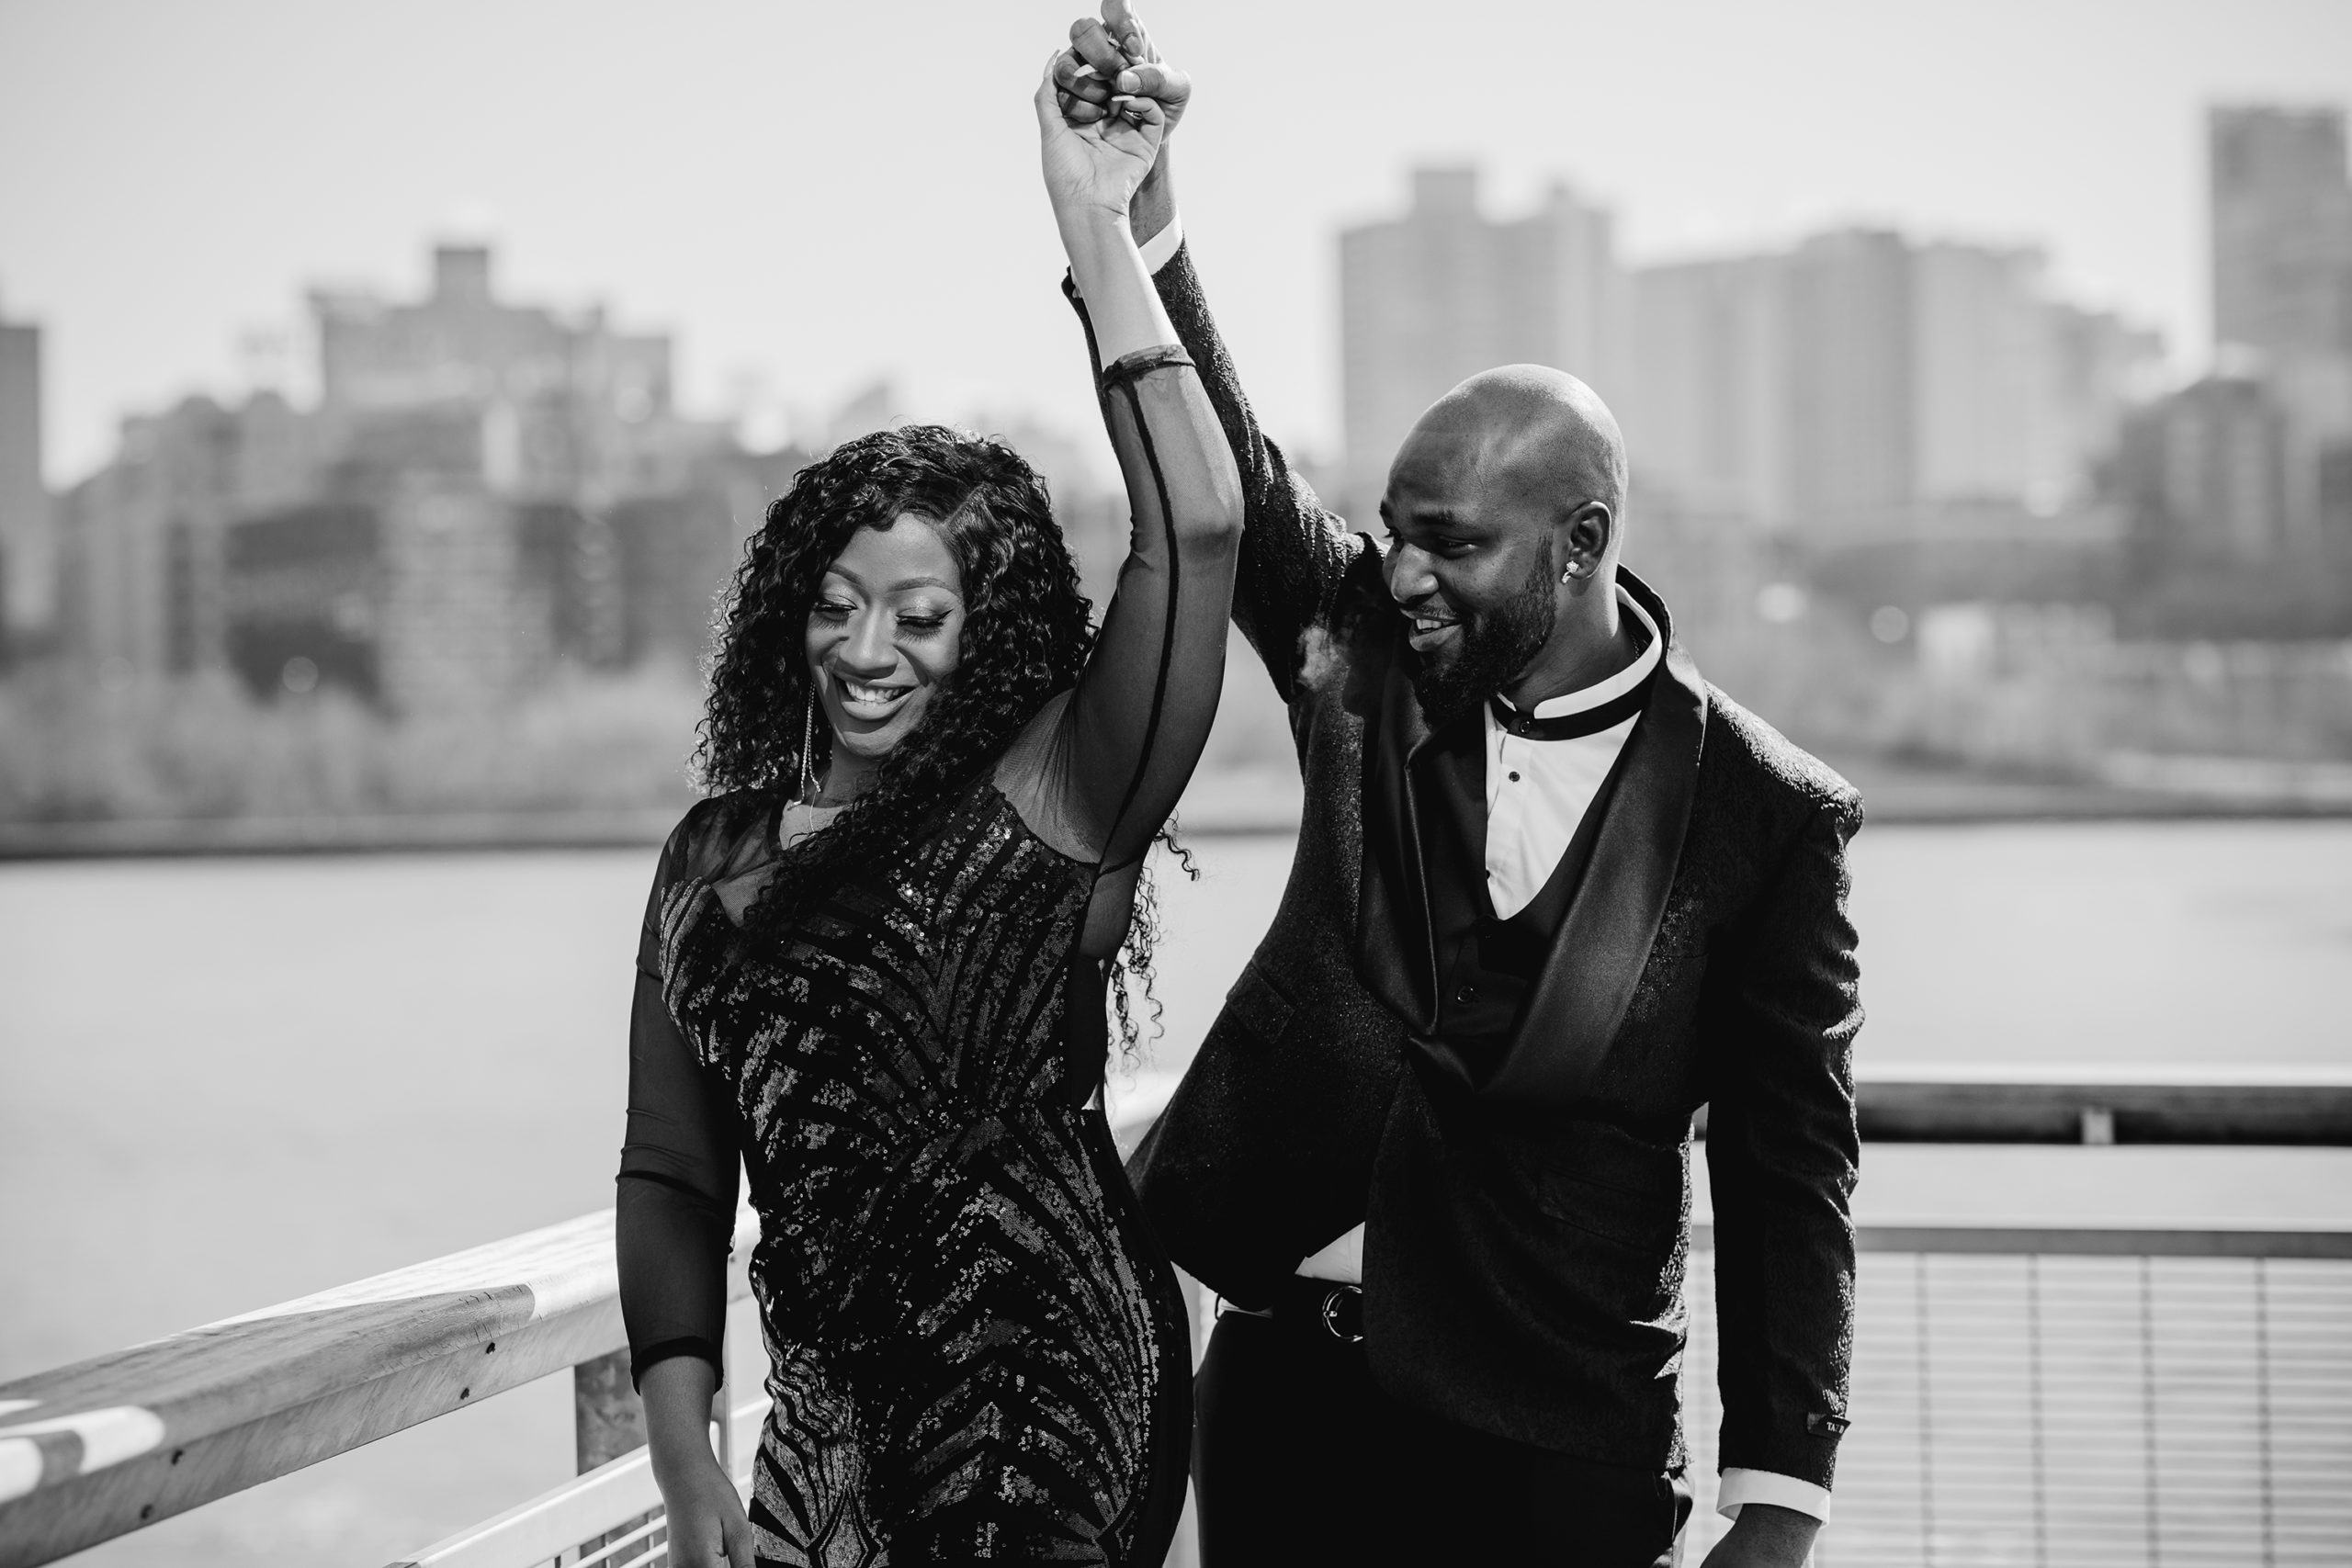 Stunning Wintery South Street Seaport Engagement Photography